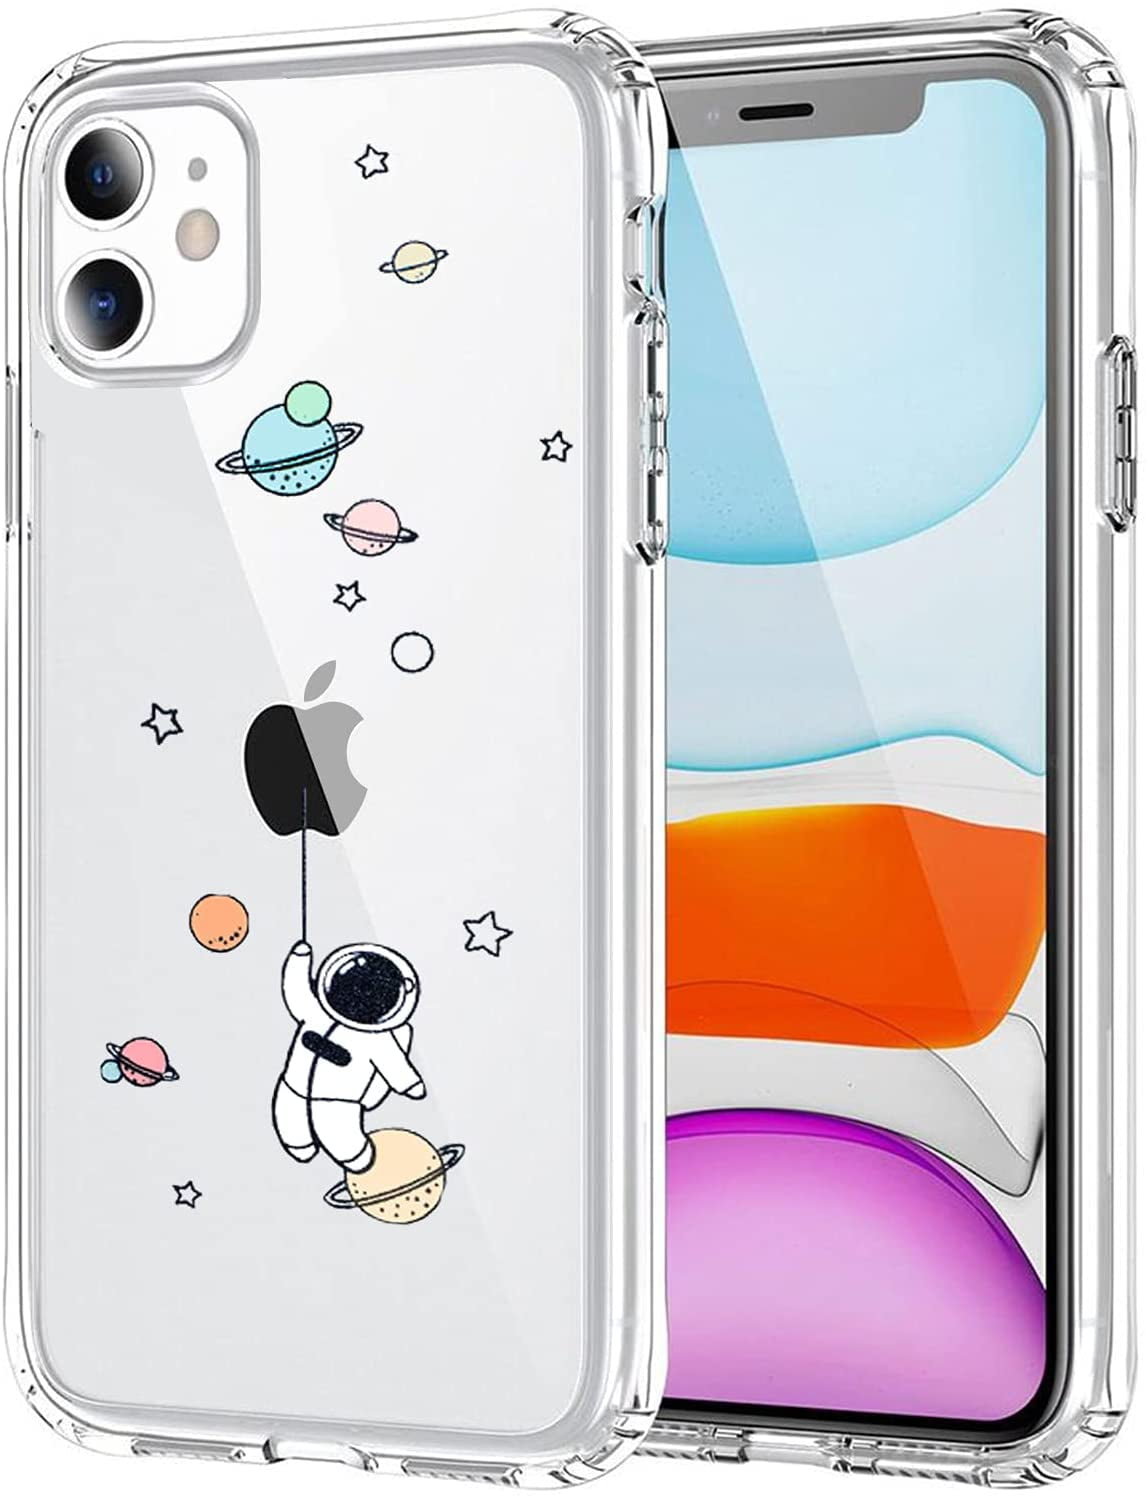 AMART Compatible with iPhone 12 /iPhone 12 Pro Case Clear Soft TPU Flexible Rubber Universe Rainbow Planet Star Design Case for iPhone 12/12 Pro Planet